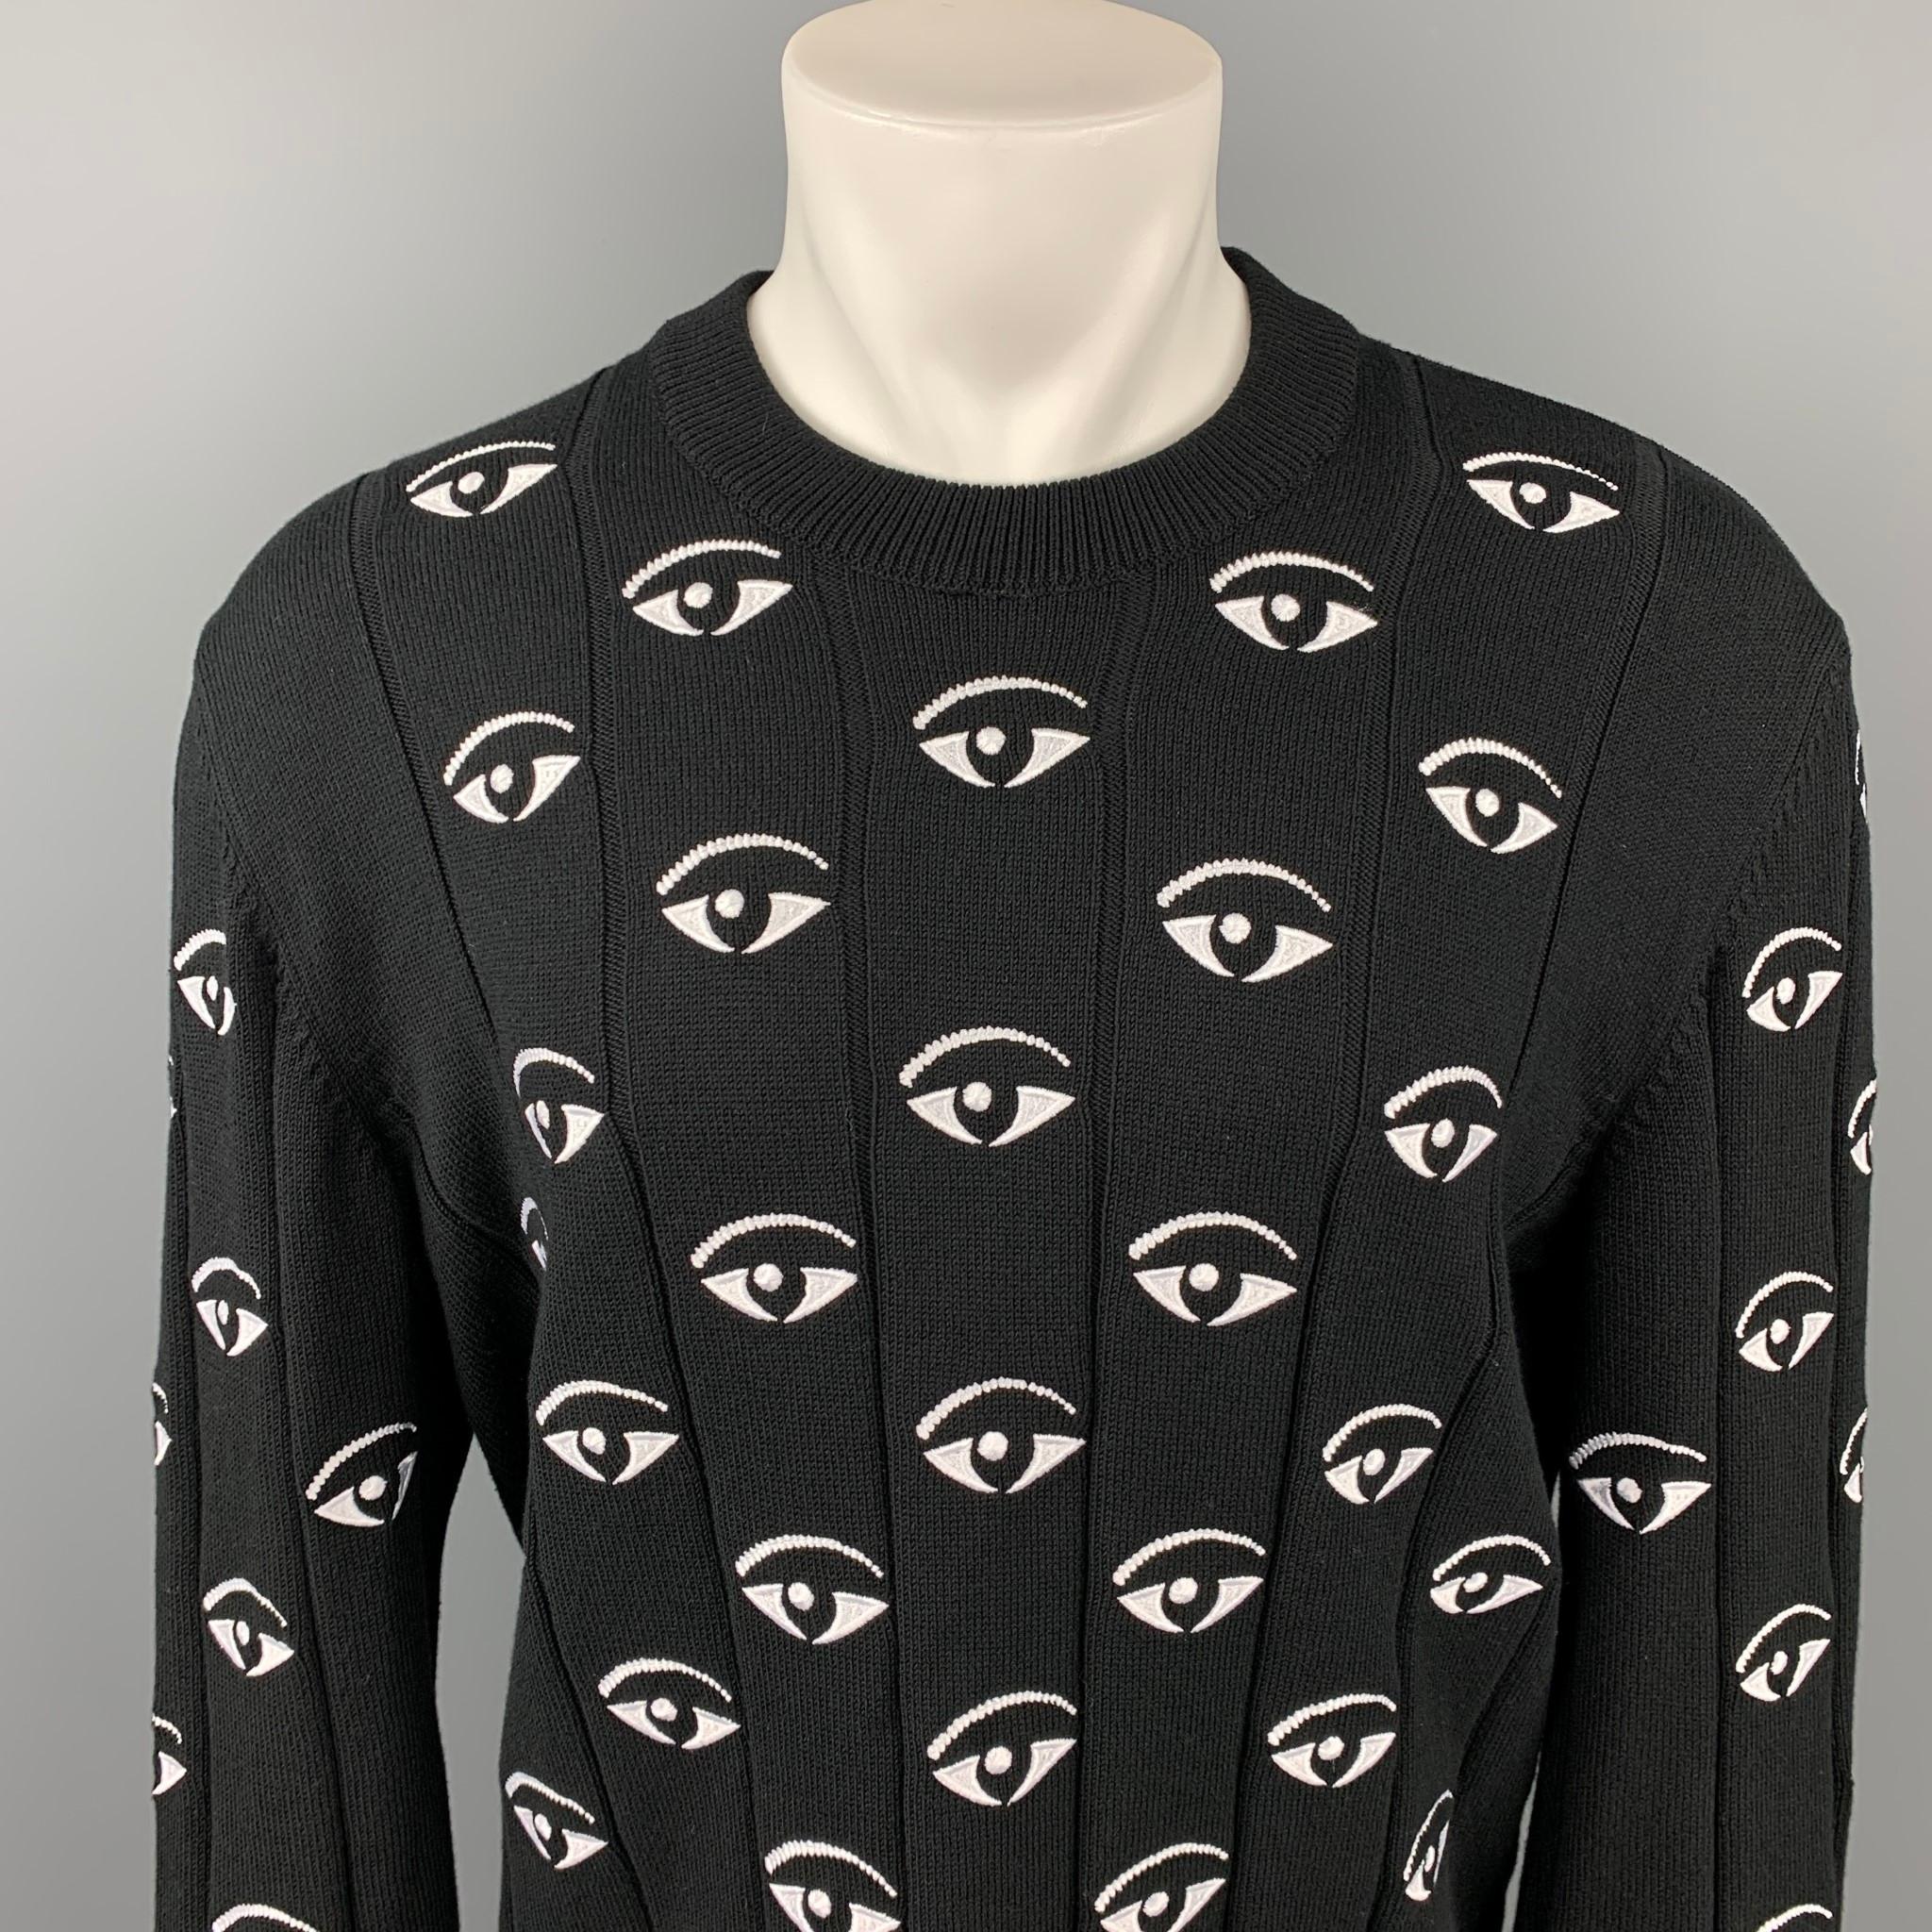 KENZO pullover comes in a black & white cotton with embroidered eyes throughout featuring a crew-neck. 

Very Good Pre-Owned Condition.
Marked: XL
Original Retail Price: $525.00

Measurements:

Shoulder: 21 in.
Chest: 46 in.
Sleeve: 29 in.
Length: